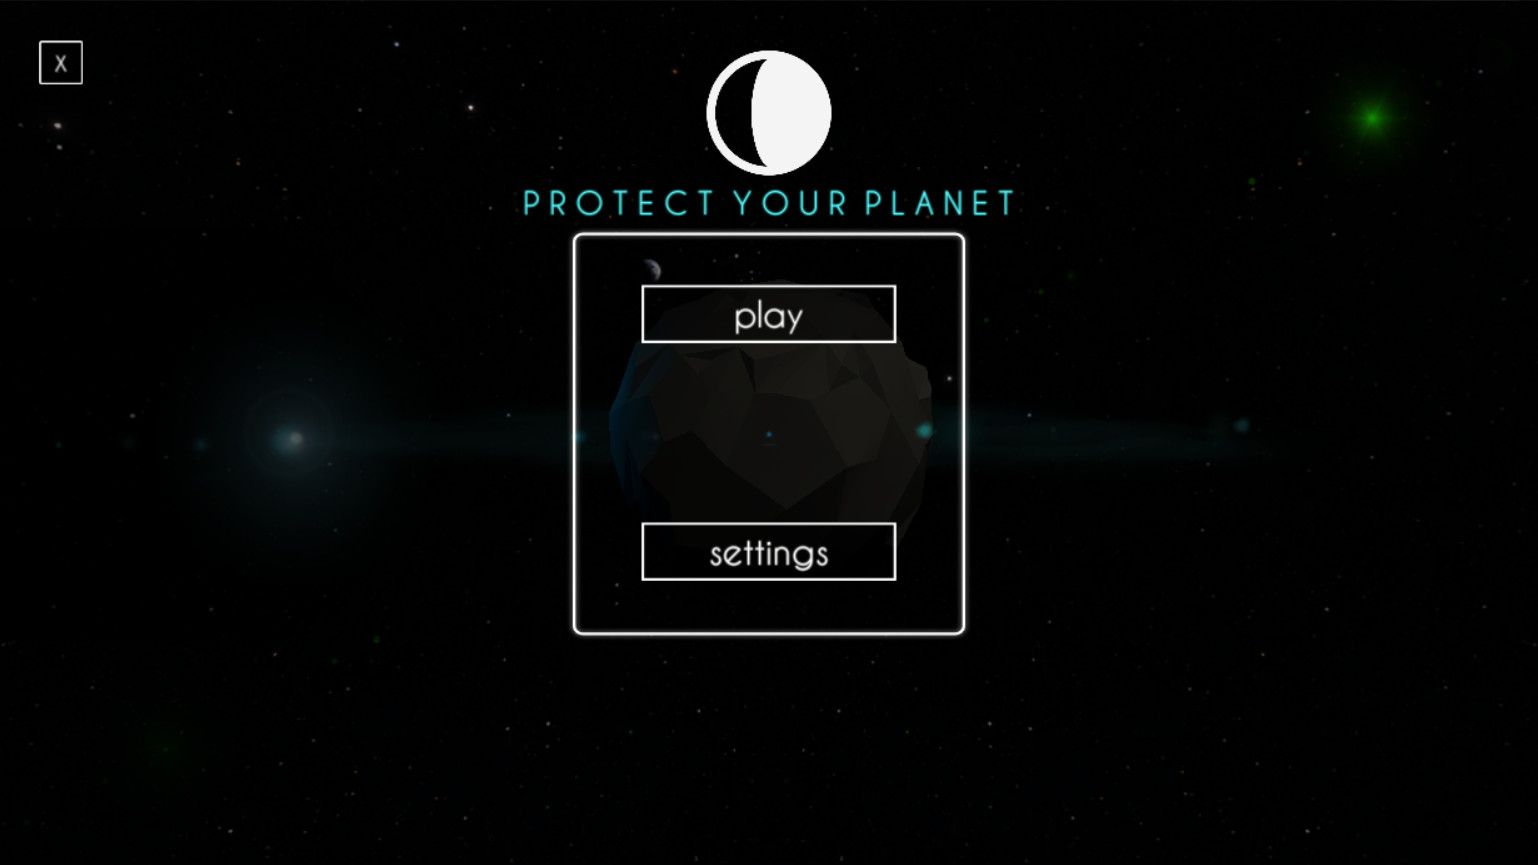 Protect your planet screenshot